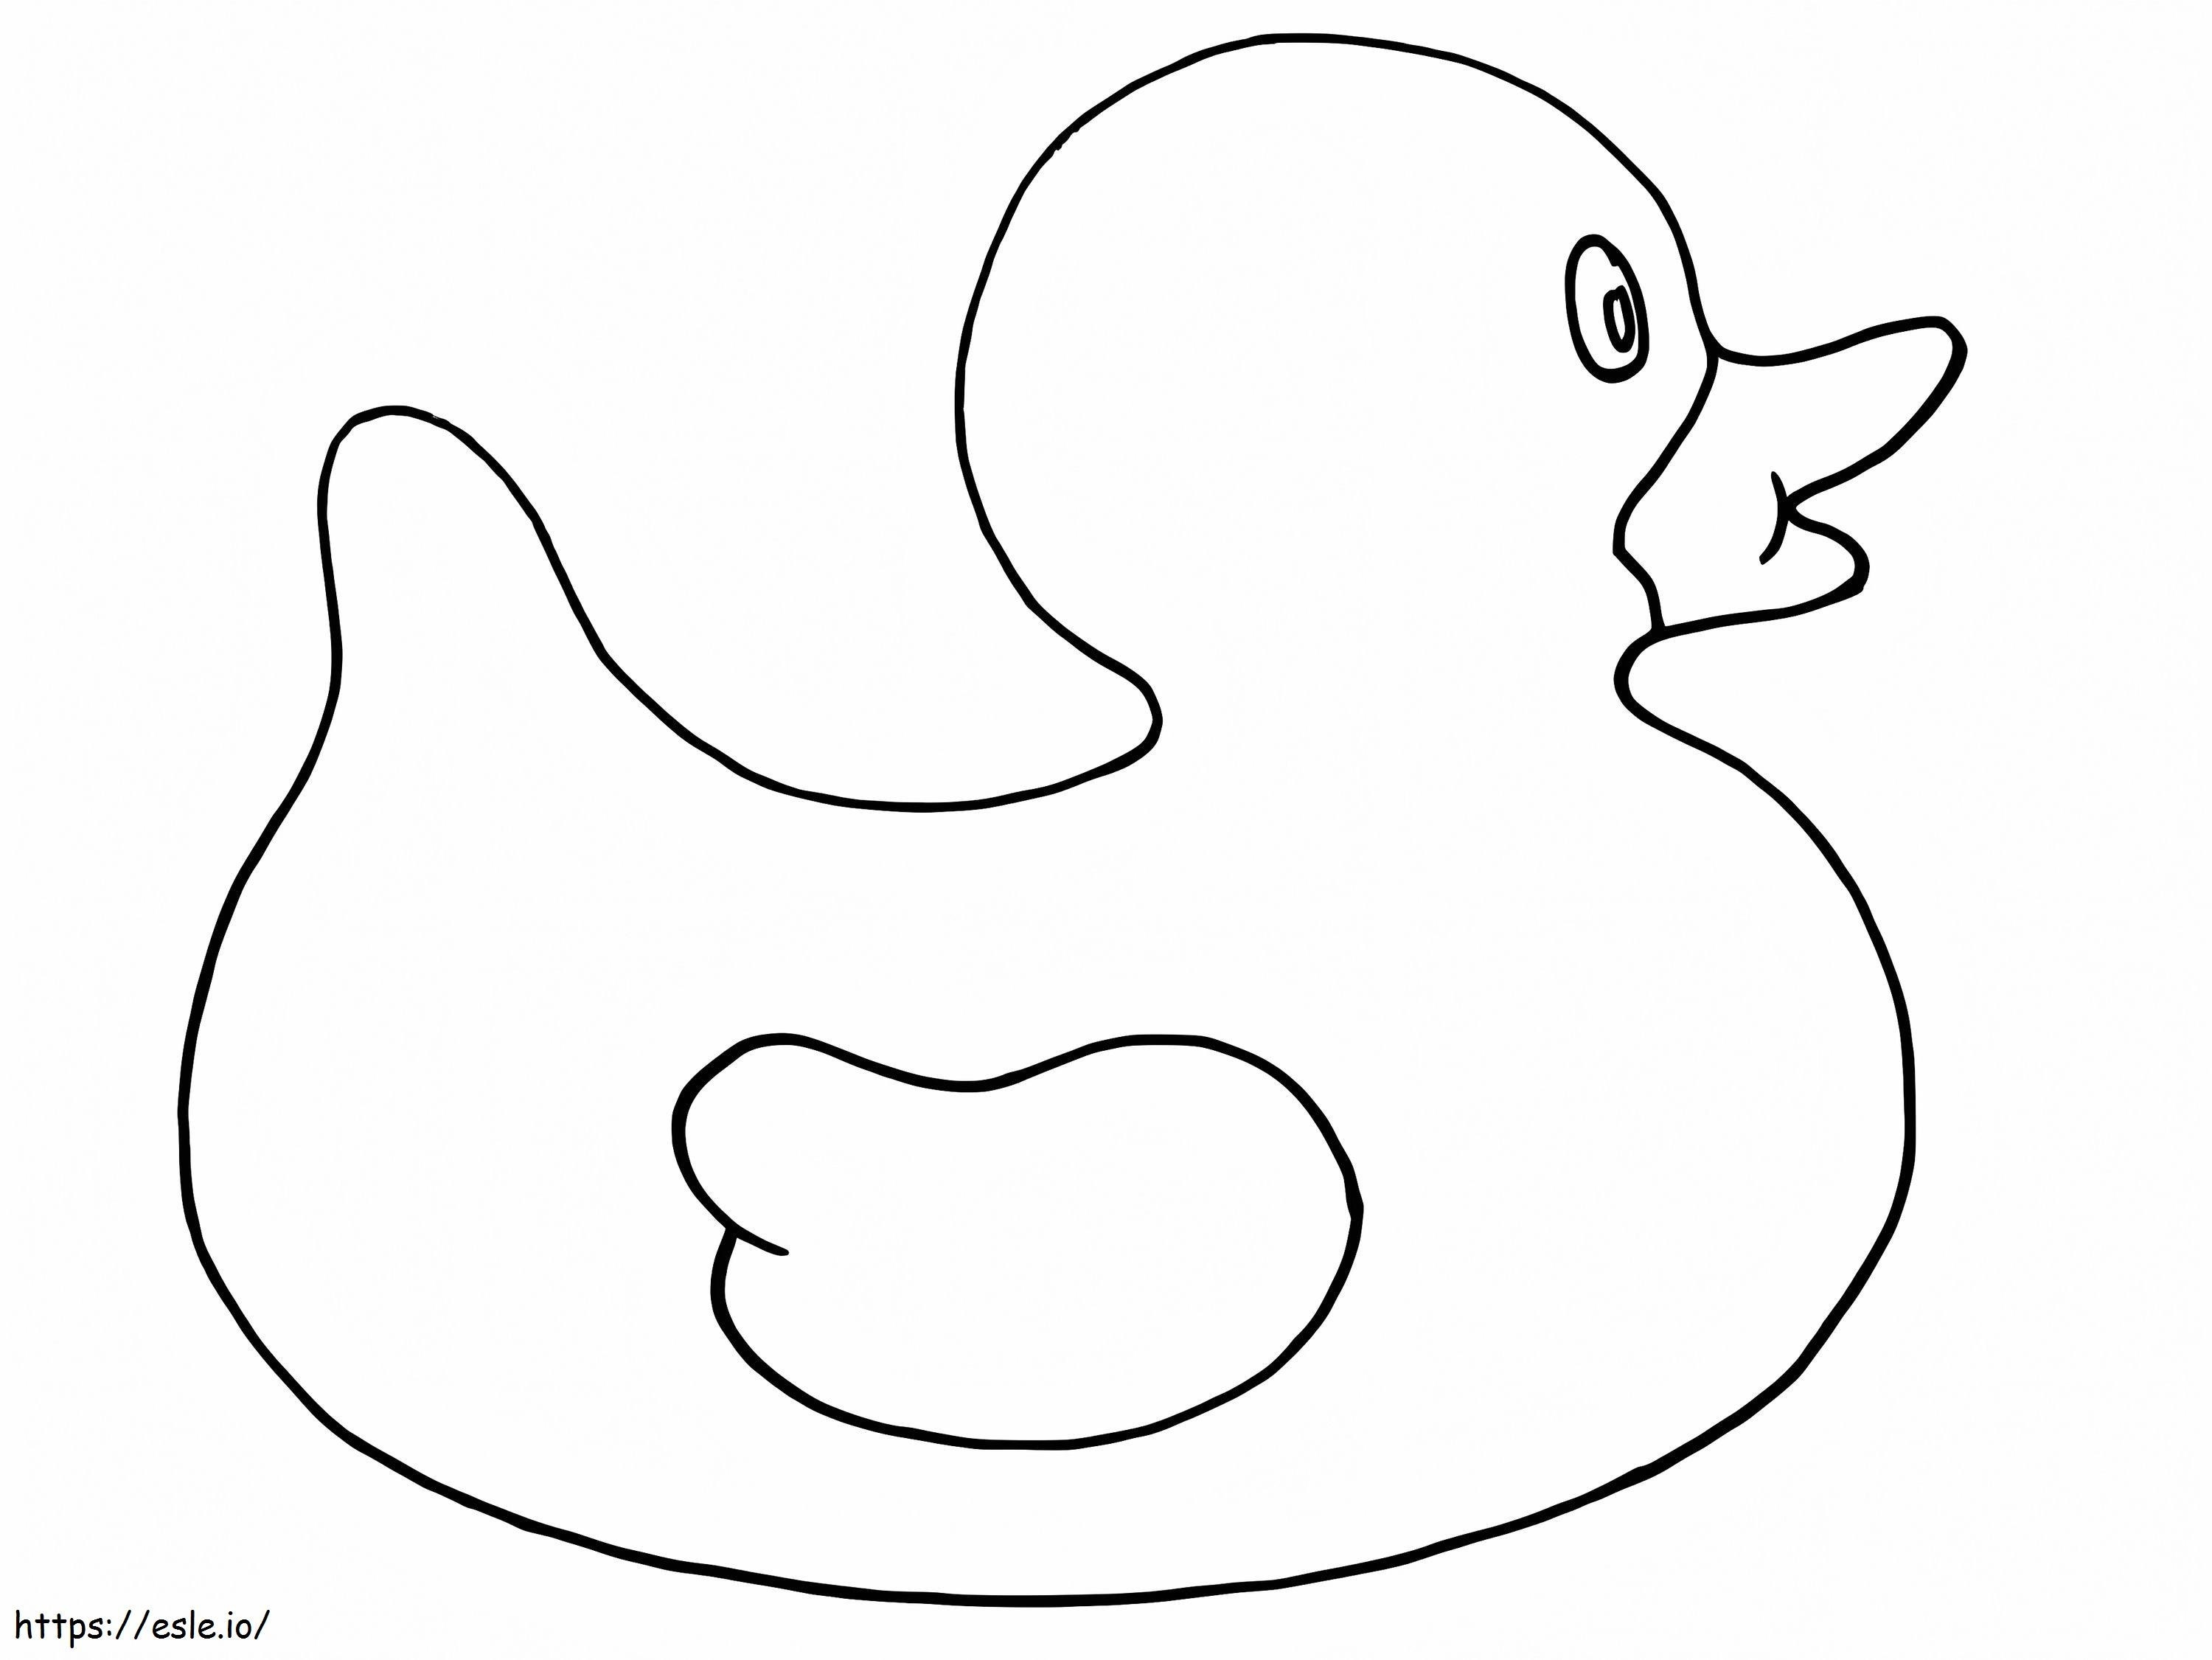 Simple Rubber Duck coloring page